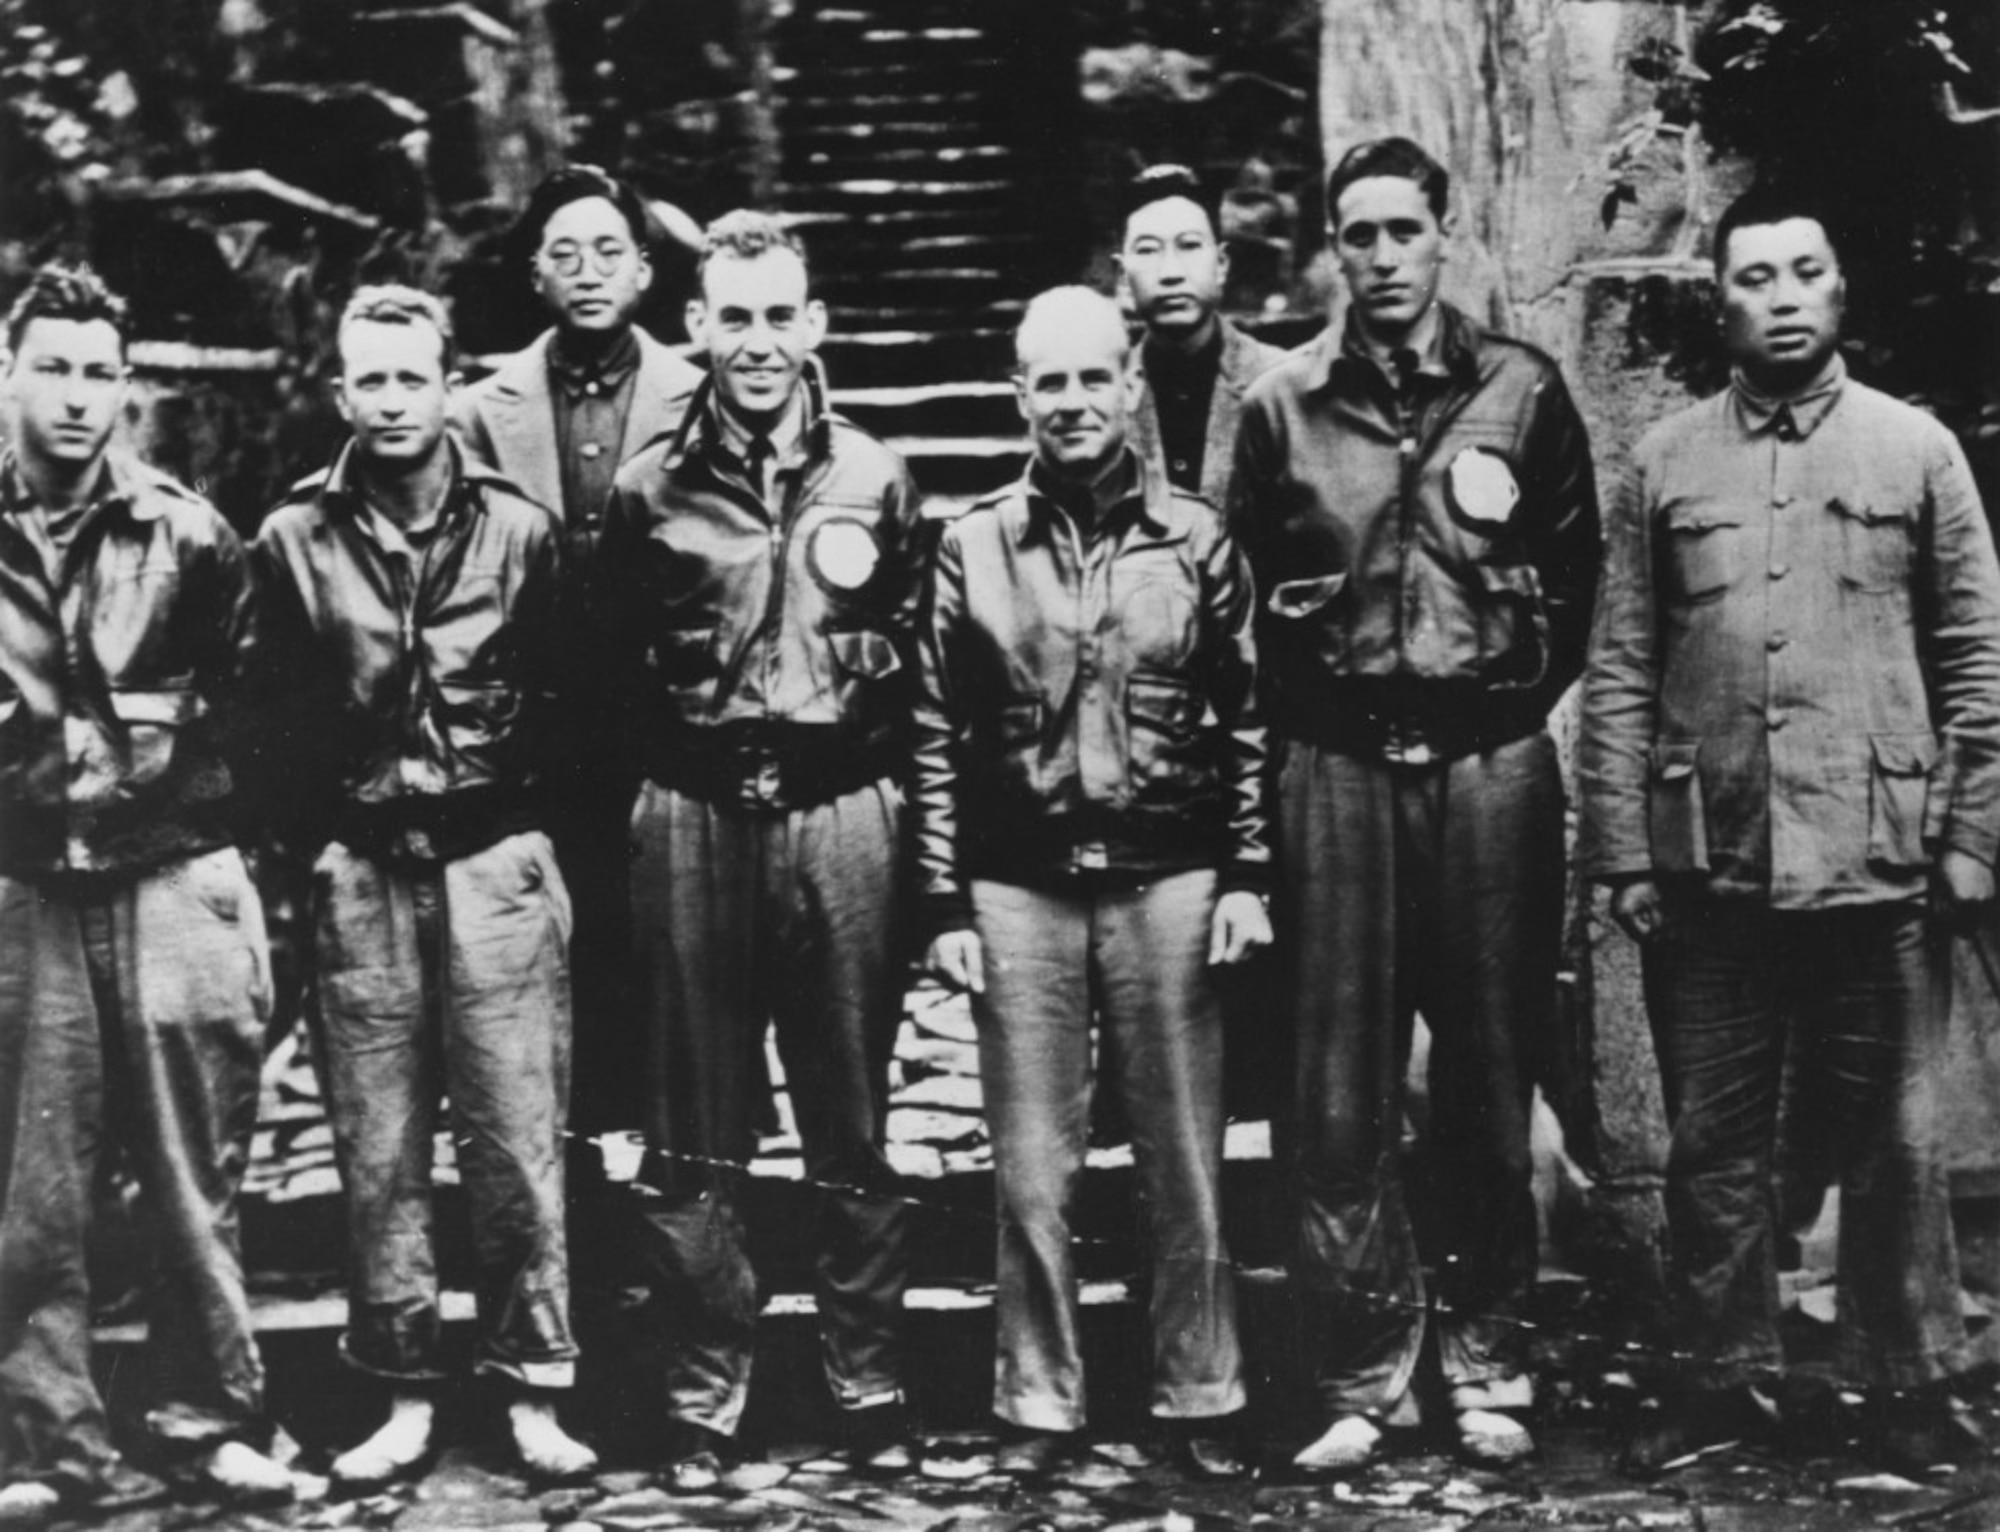 Doolittle (center) with members of his crew and Chinese officials following their bailout near Quzhou, China.  On 18 April 1942, airmen of the US Army Air Forces, led by Lt. Col. James H. (Jimmy) Doolittle, carried the Battle of the Pacific to the heart of the Japanese empire with a surprising and daring raid on military targets at Tokyo, Yokohama, Yokosuka, Nagoya, and Kobe. This heroic attack against these major cities was the result of coordination between the Army Air Forces and the US Navy, which carried the sixteen North American B-25 medium bombers aboard the carrier USS Hornet to within take-off distance of the Japanese Islands. Here, a pair of alert escorts follow the USS Hornet to protect her lethal cargo of B-25 bombers. (Courtesy Photo)